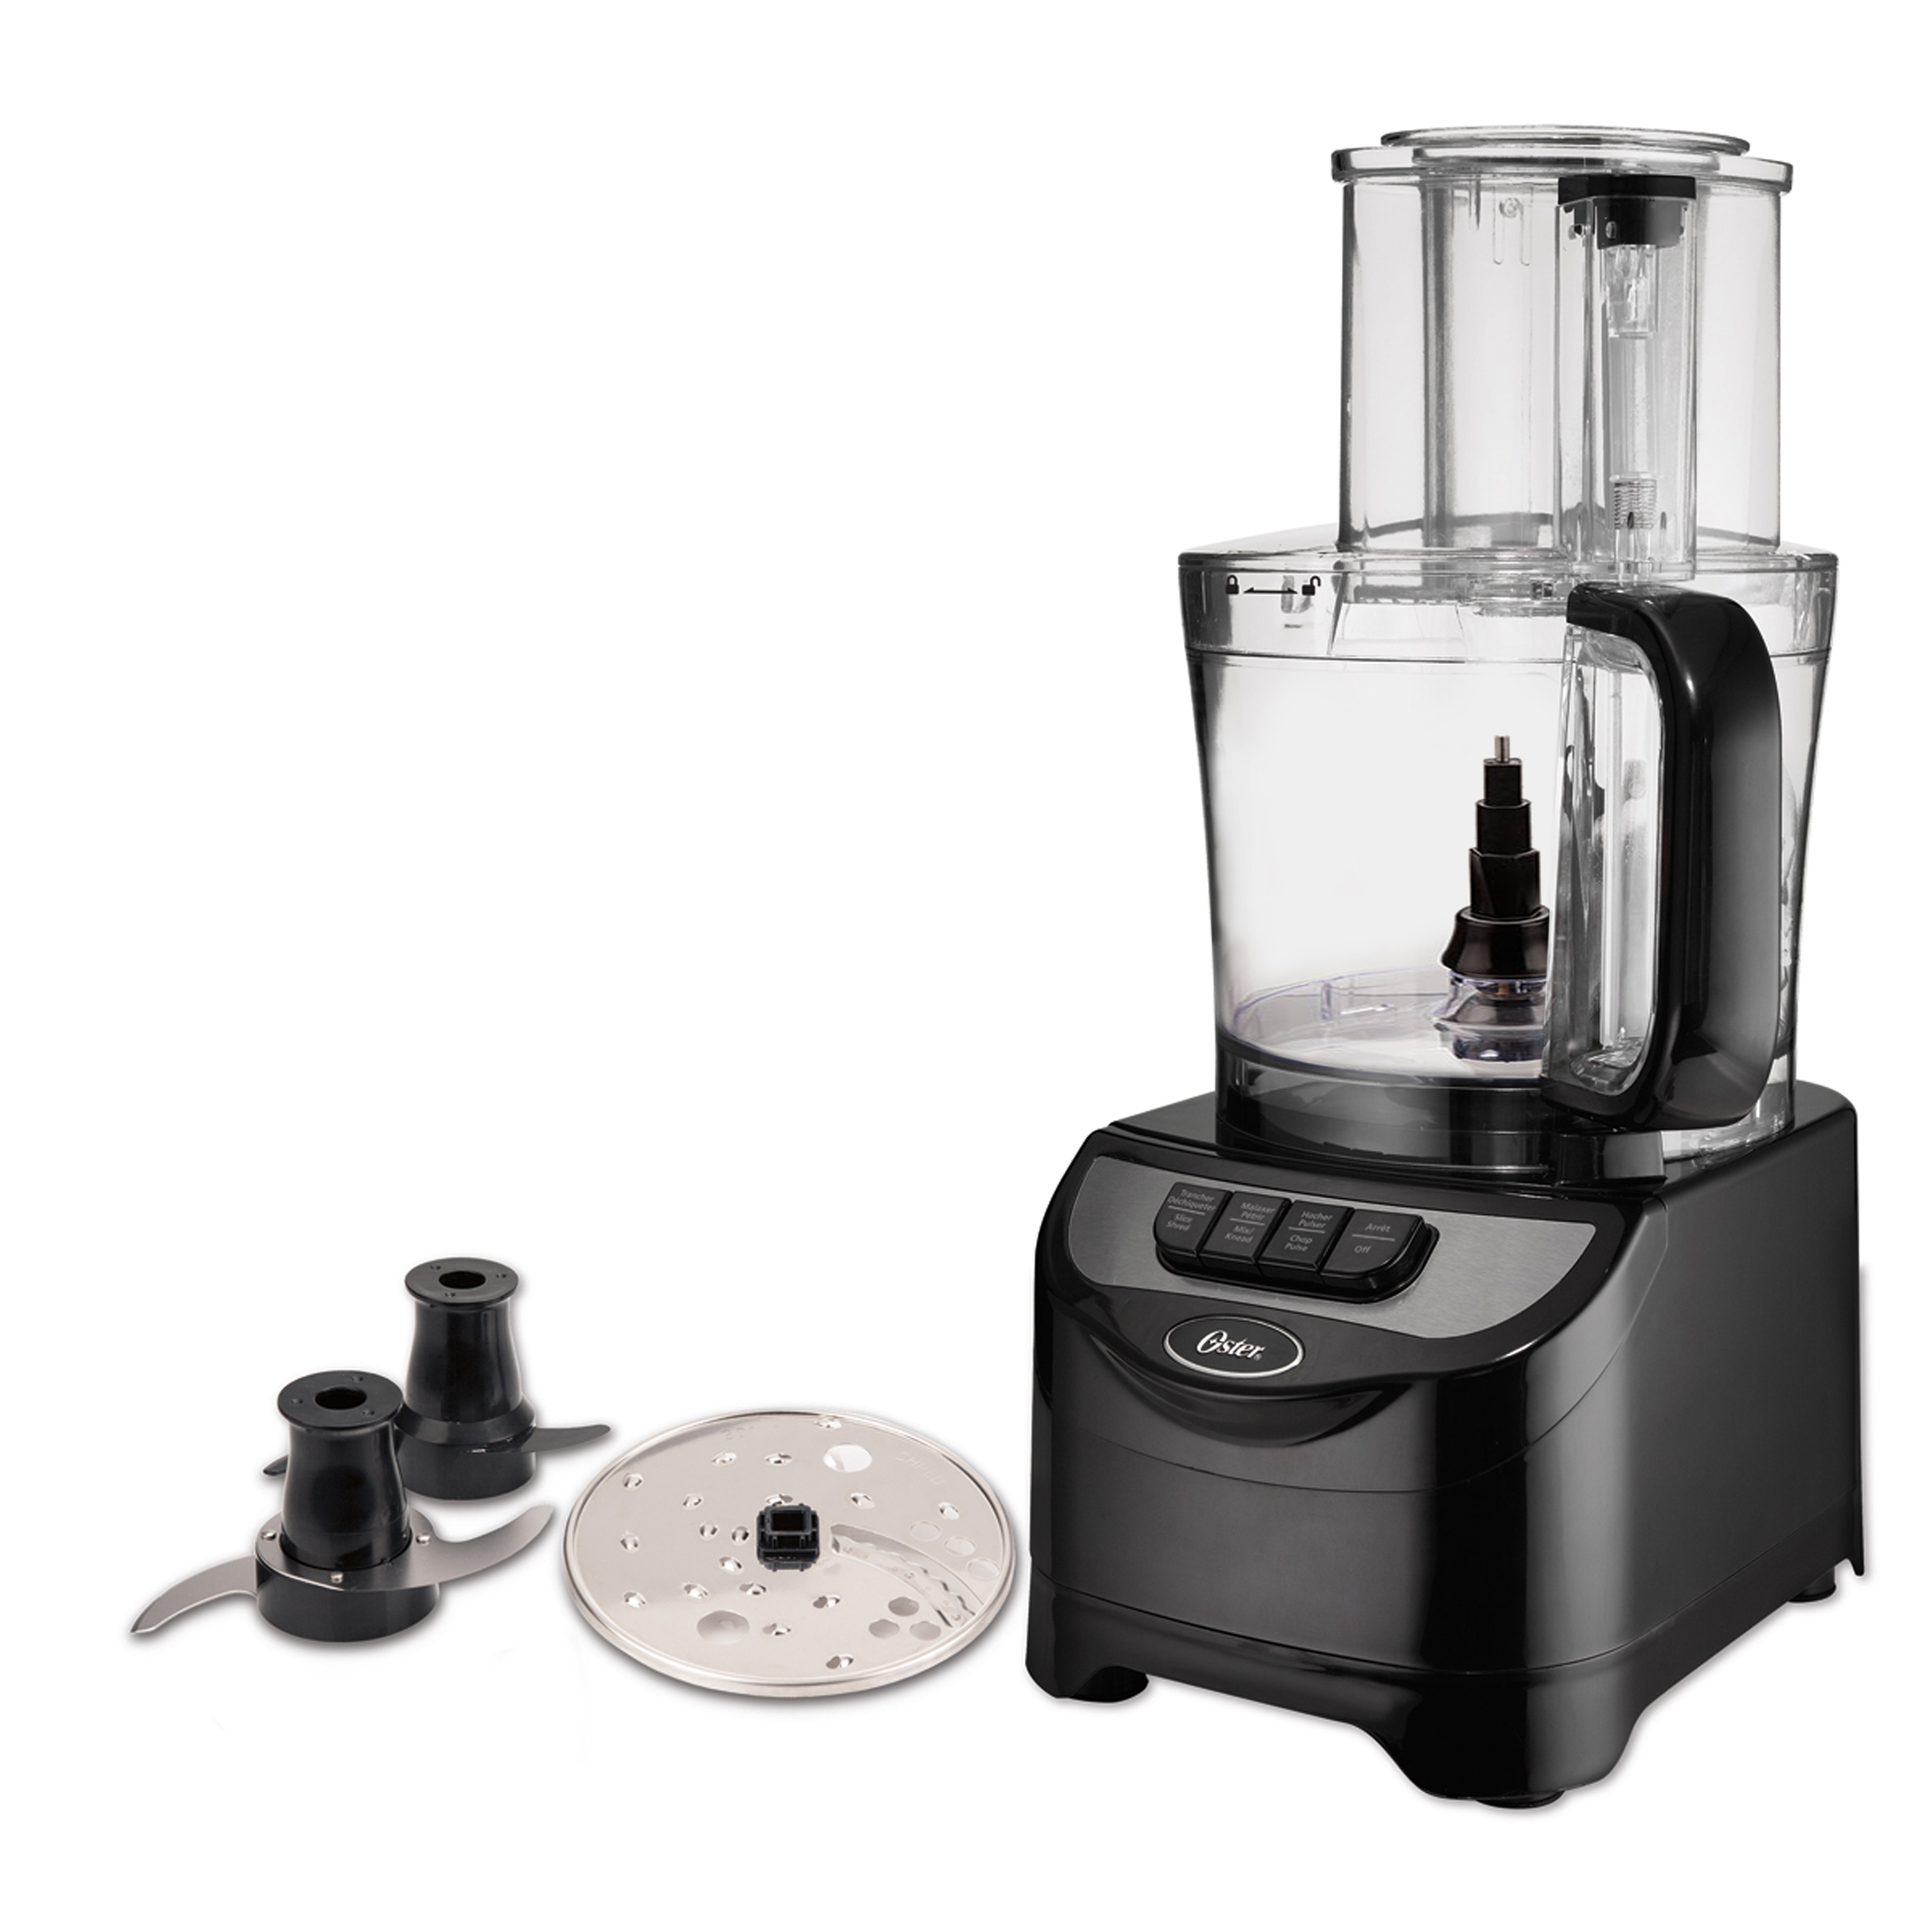 Oster 4-in-1 Versatility 10 Cup 2 Speed Food Processor System in Black - image 1 of 13